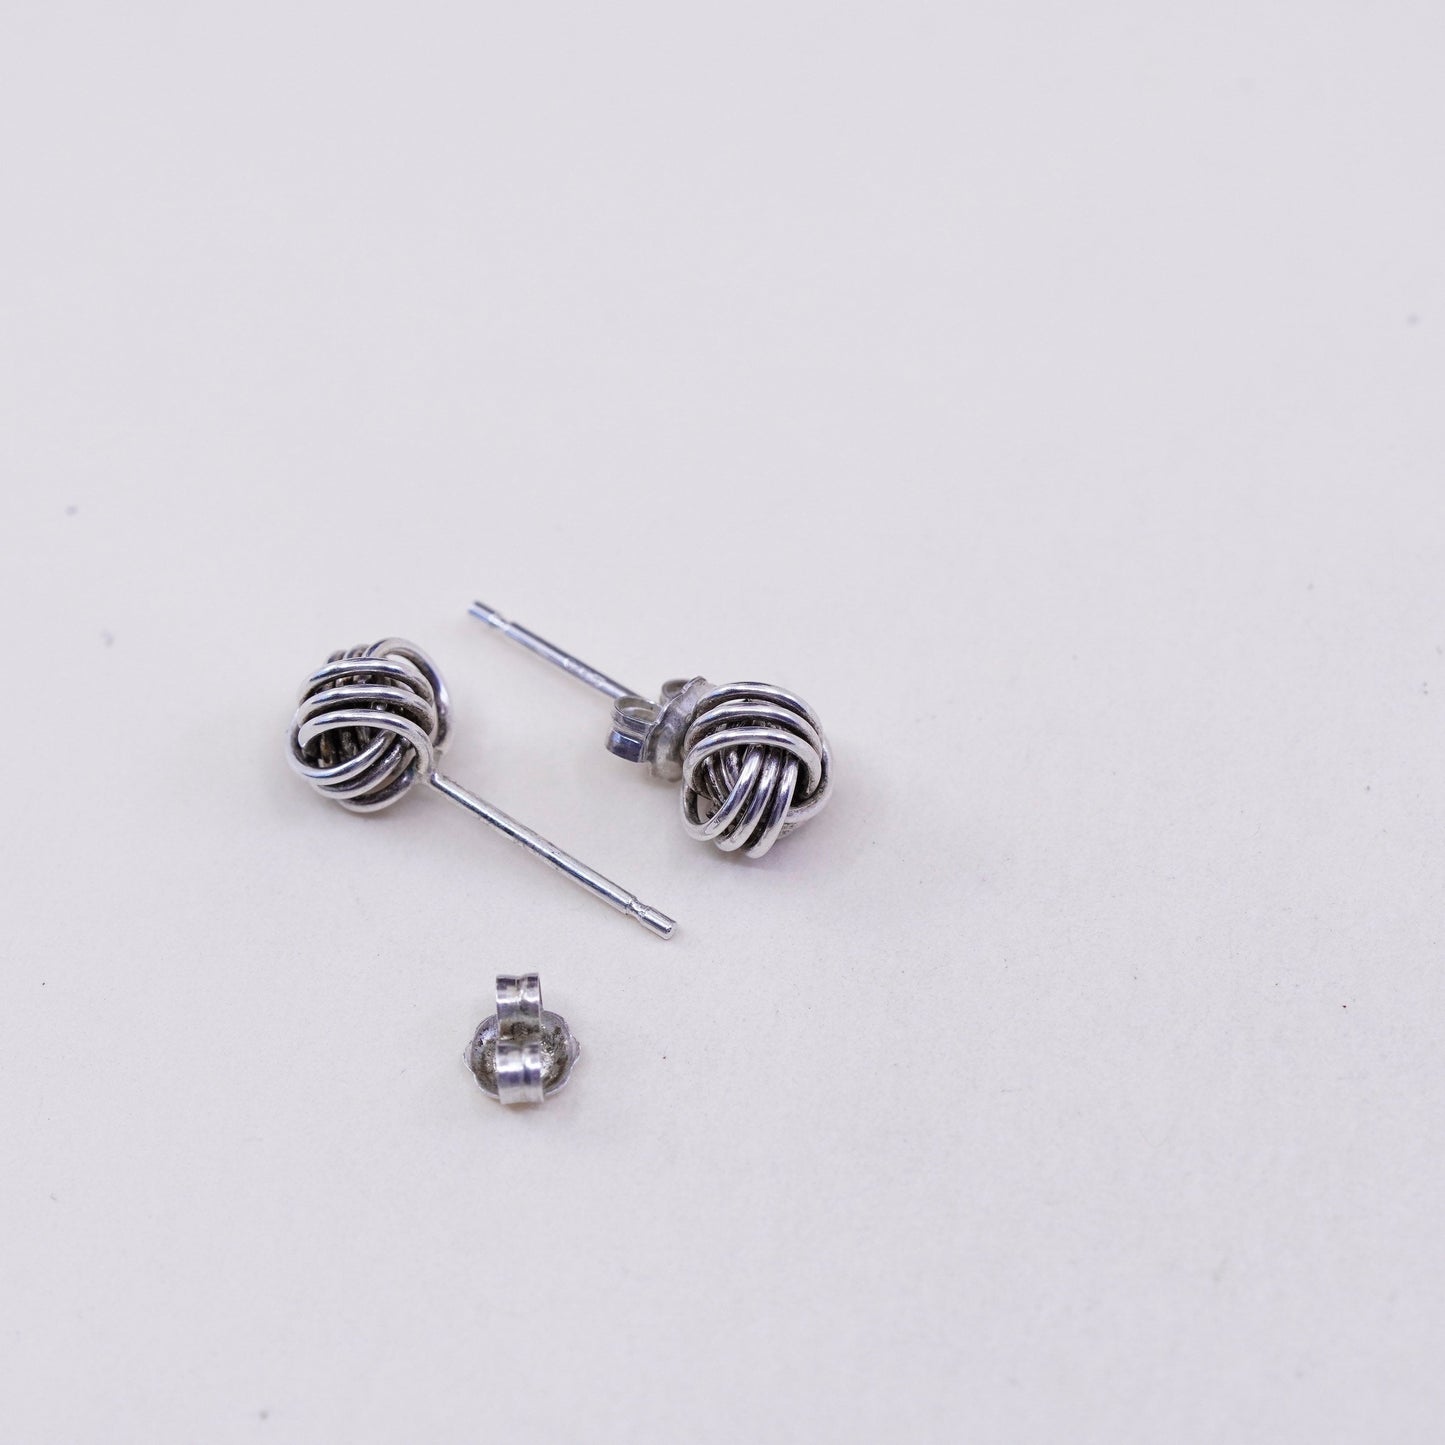 0.25”, Vintage Sterling 925 silver handmade earrings, Entwined cable studs